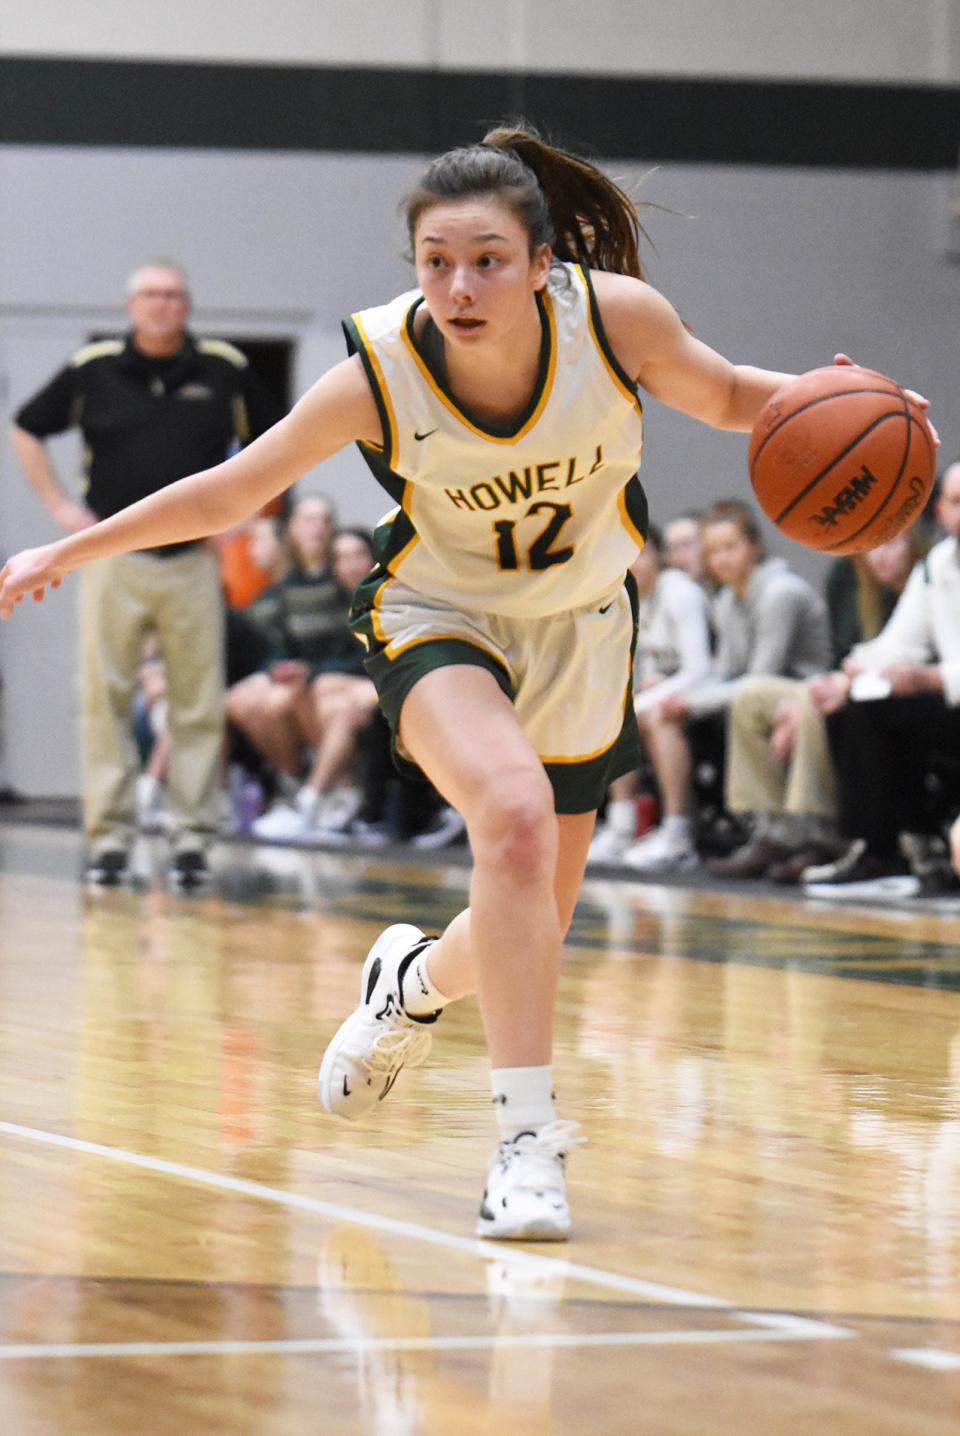 Molly Deurloo had 12 points and 10 rebounds in a 44-27 victory over Hartland Friday, Jan. 27, 2023.